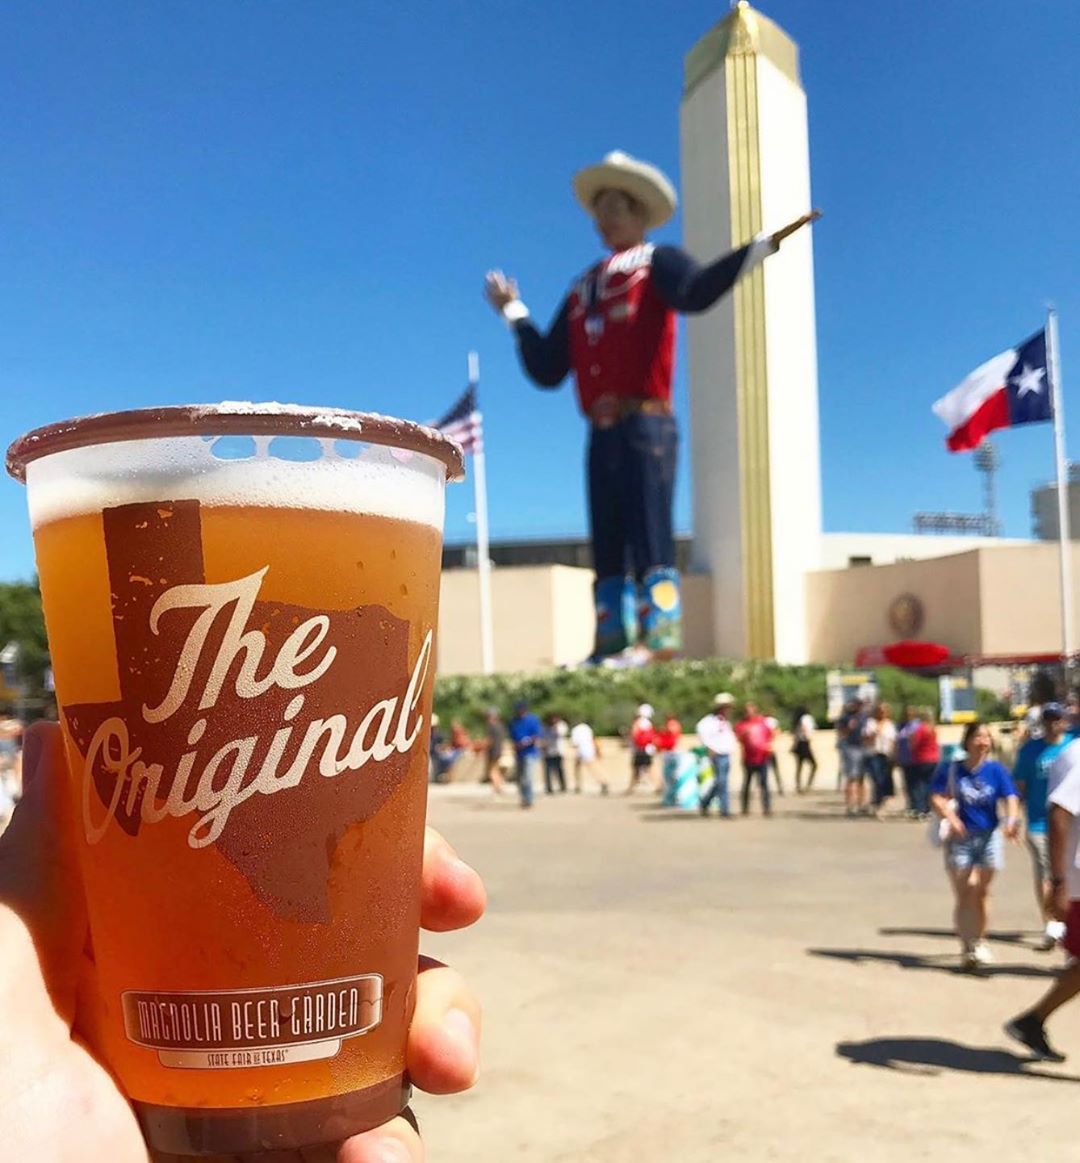 This warmer weather has us reminiscing on #StateFairofTX & cold beer on Opening Day. 🤠 Cheers to #NationalBeerDay, comment your favorite #TexasBeer below! 🍻 #BigTex #Repost 📸: @communitybeerco